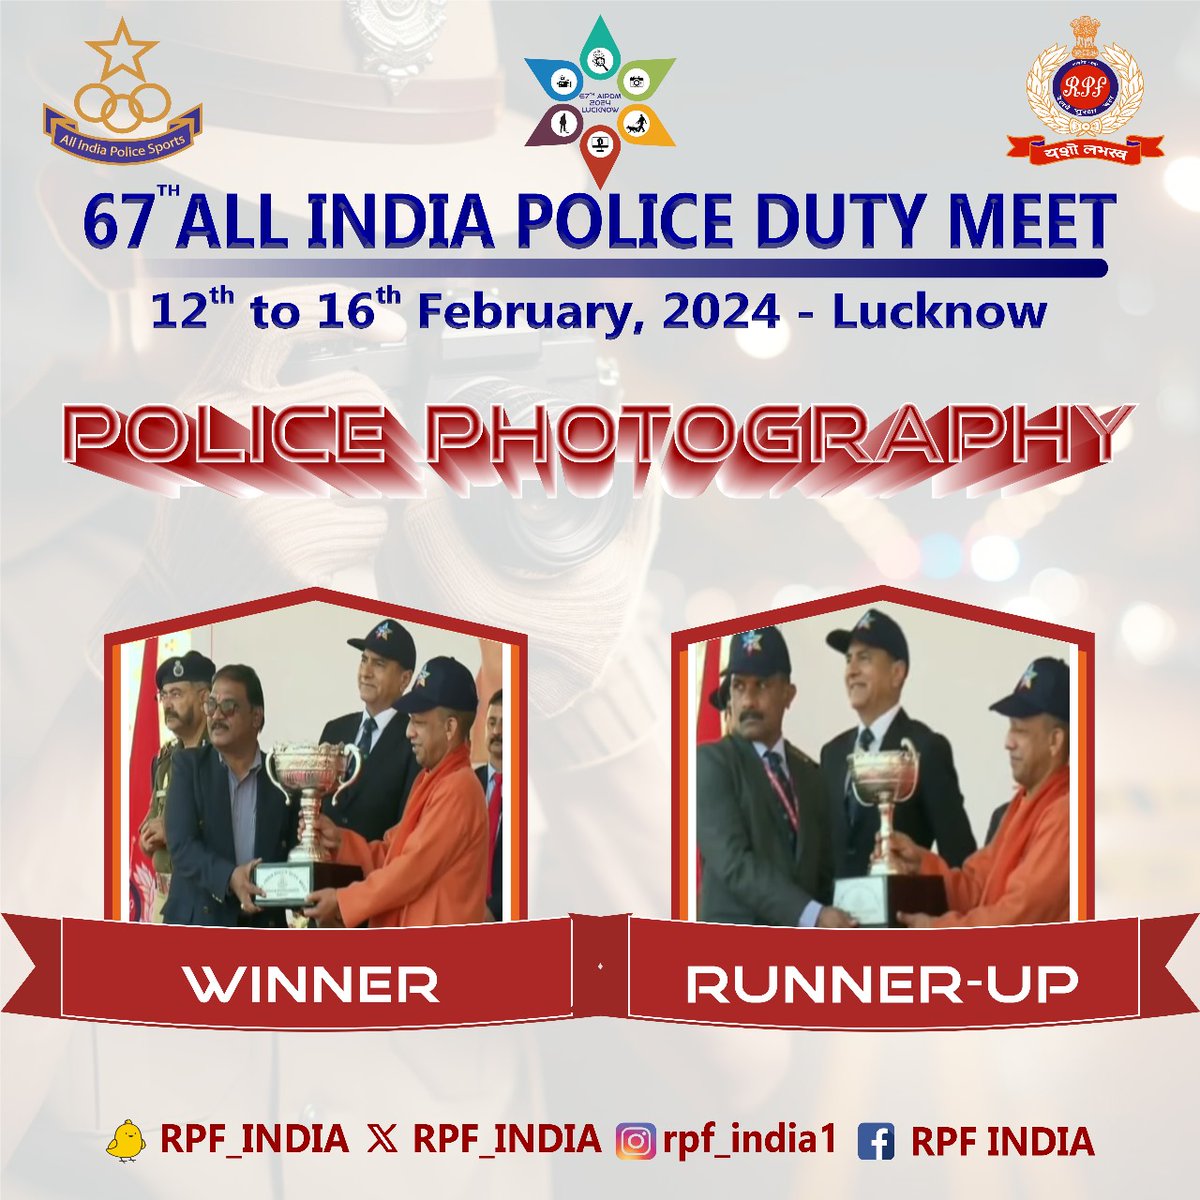 📸 Congratulations to Telangana Police, Winners of the Police Photography Competition and kudos to Karnataka Police for securing the runner-up spot at the 67th AIPDM! Your captivating visuals and storytelling capture the essence of law enforcement. @aipscb @RailMinIndia @HMOIndia